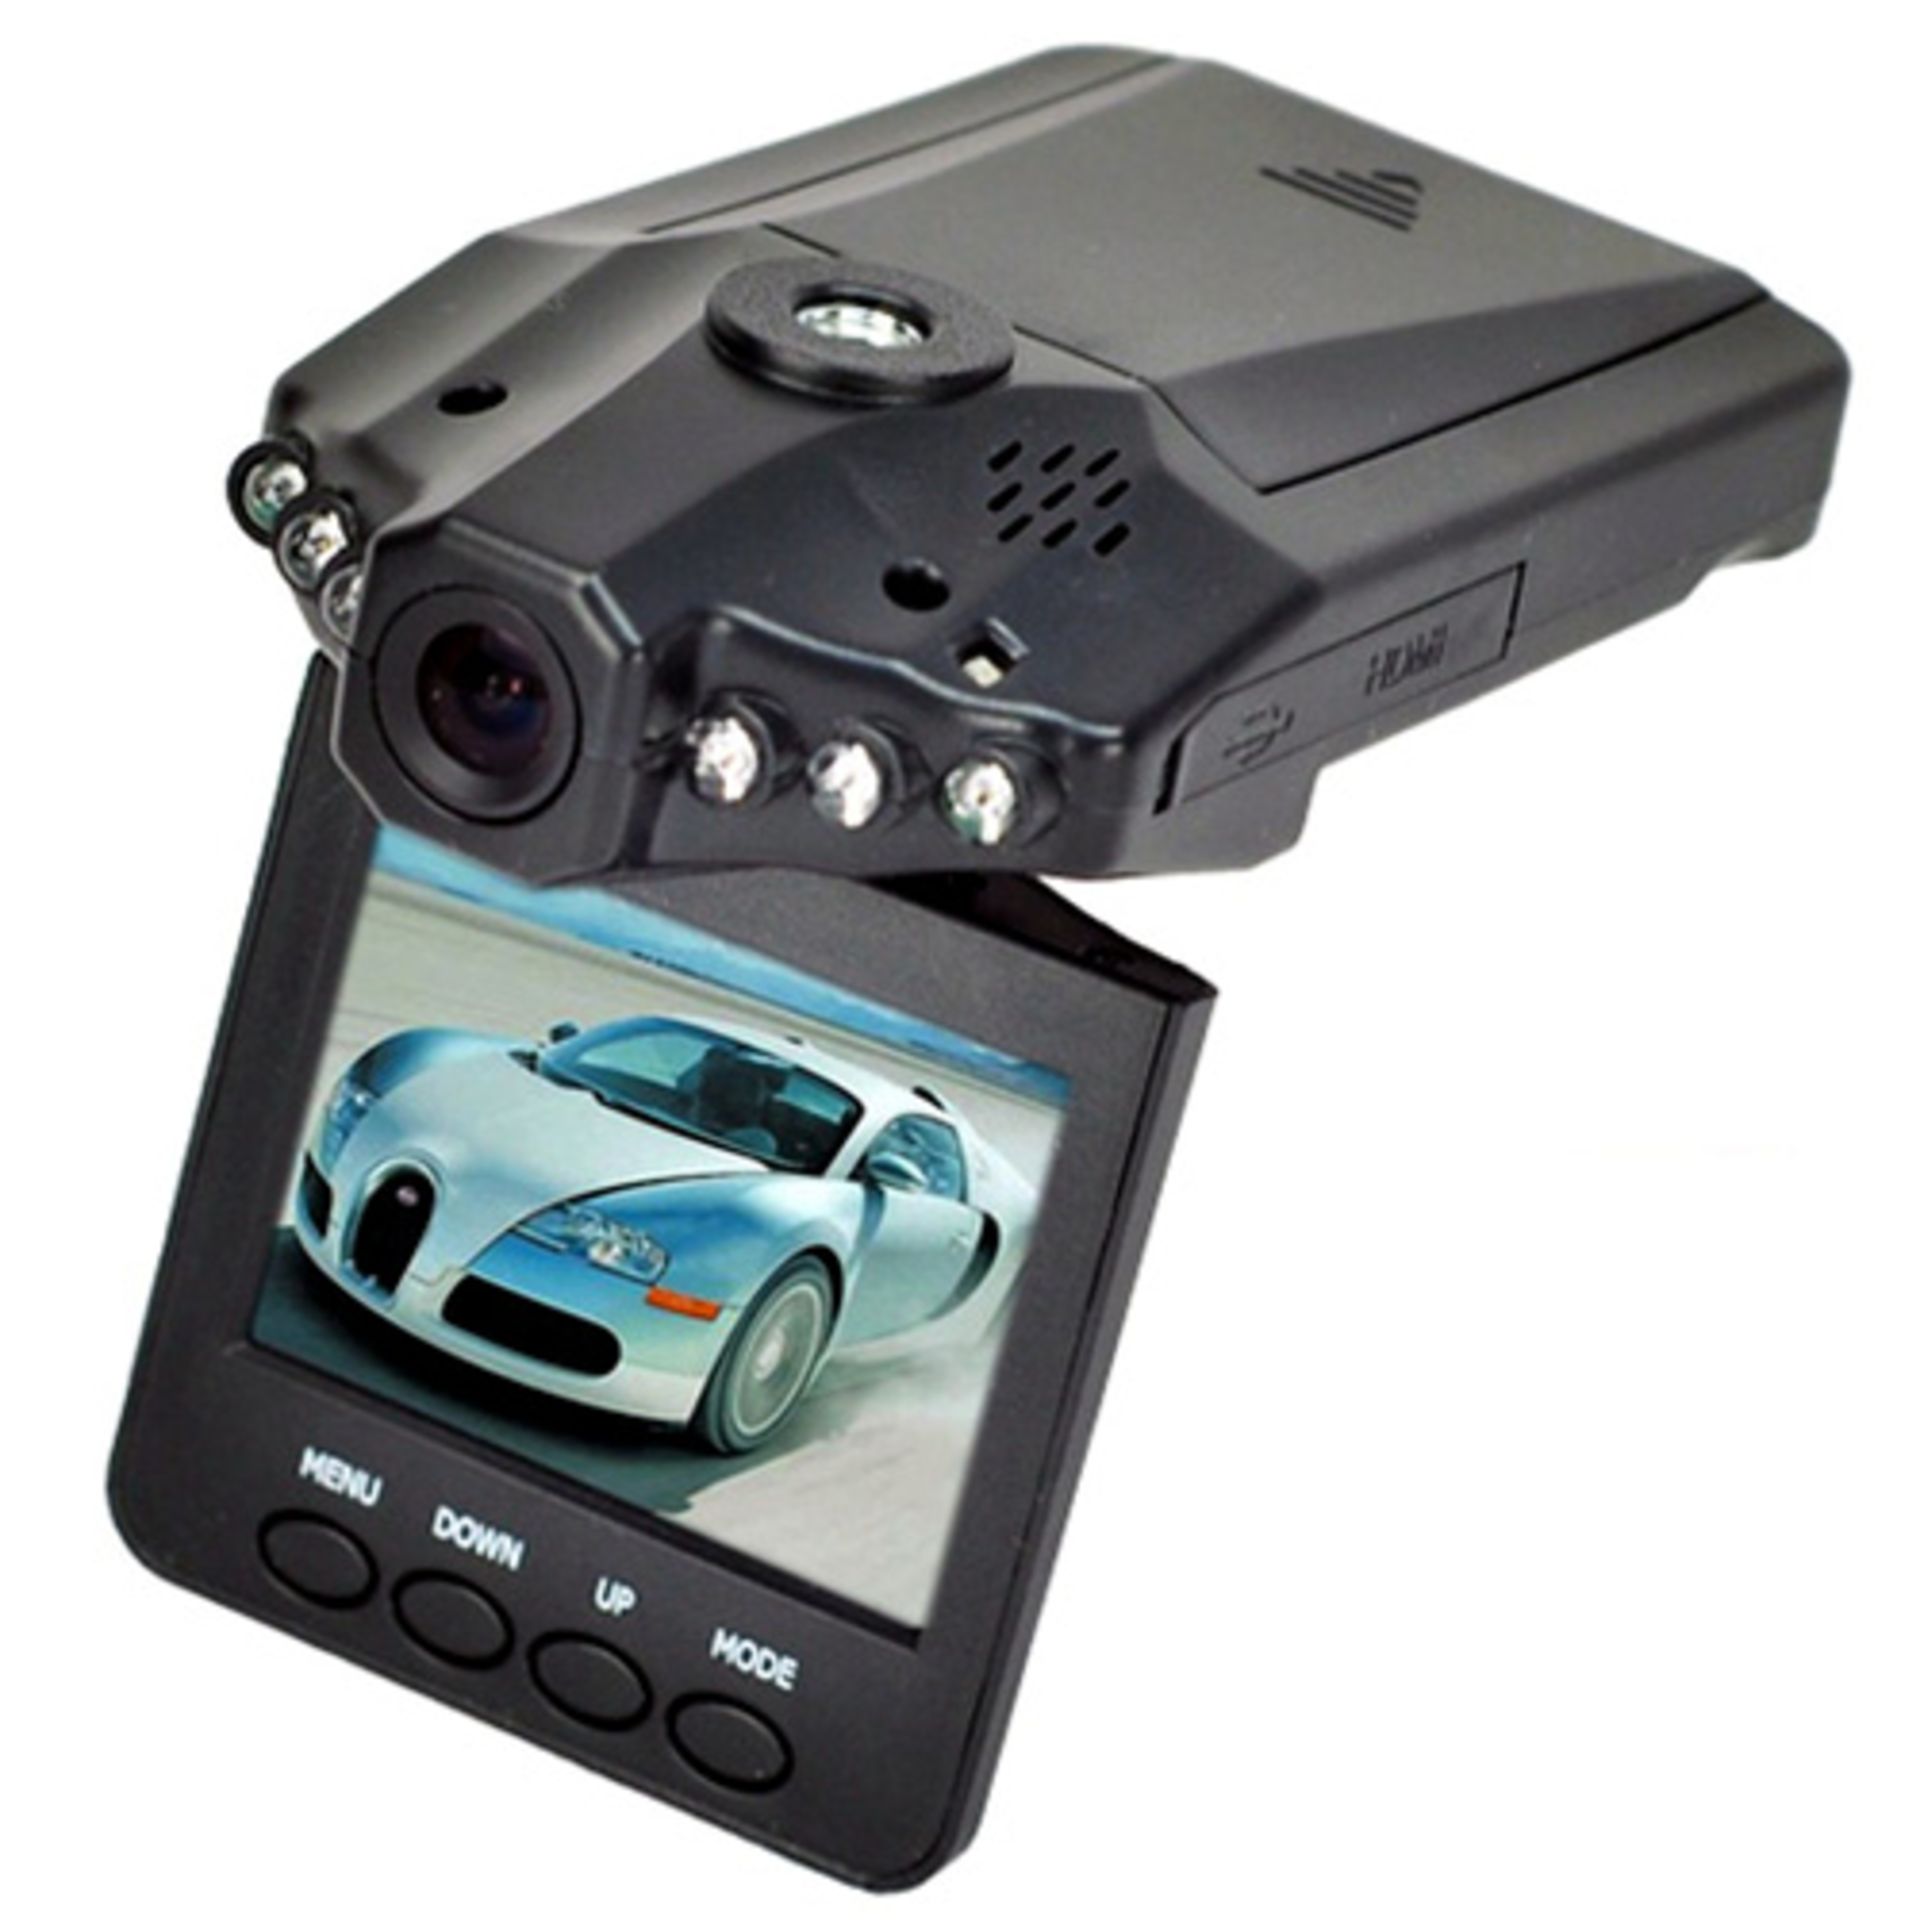 V Brand New HD Portable DVR Dashboard Camera With 2.5" TFT LCD Screen X 2 YOUR BID PRICE TO BE